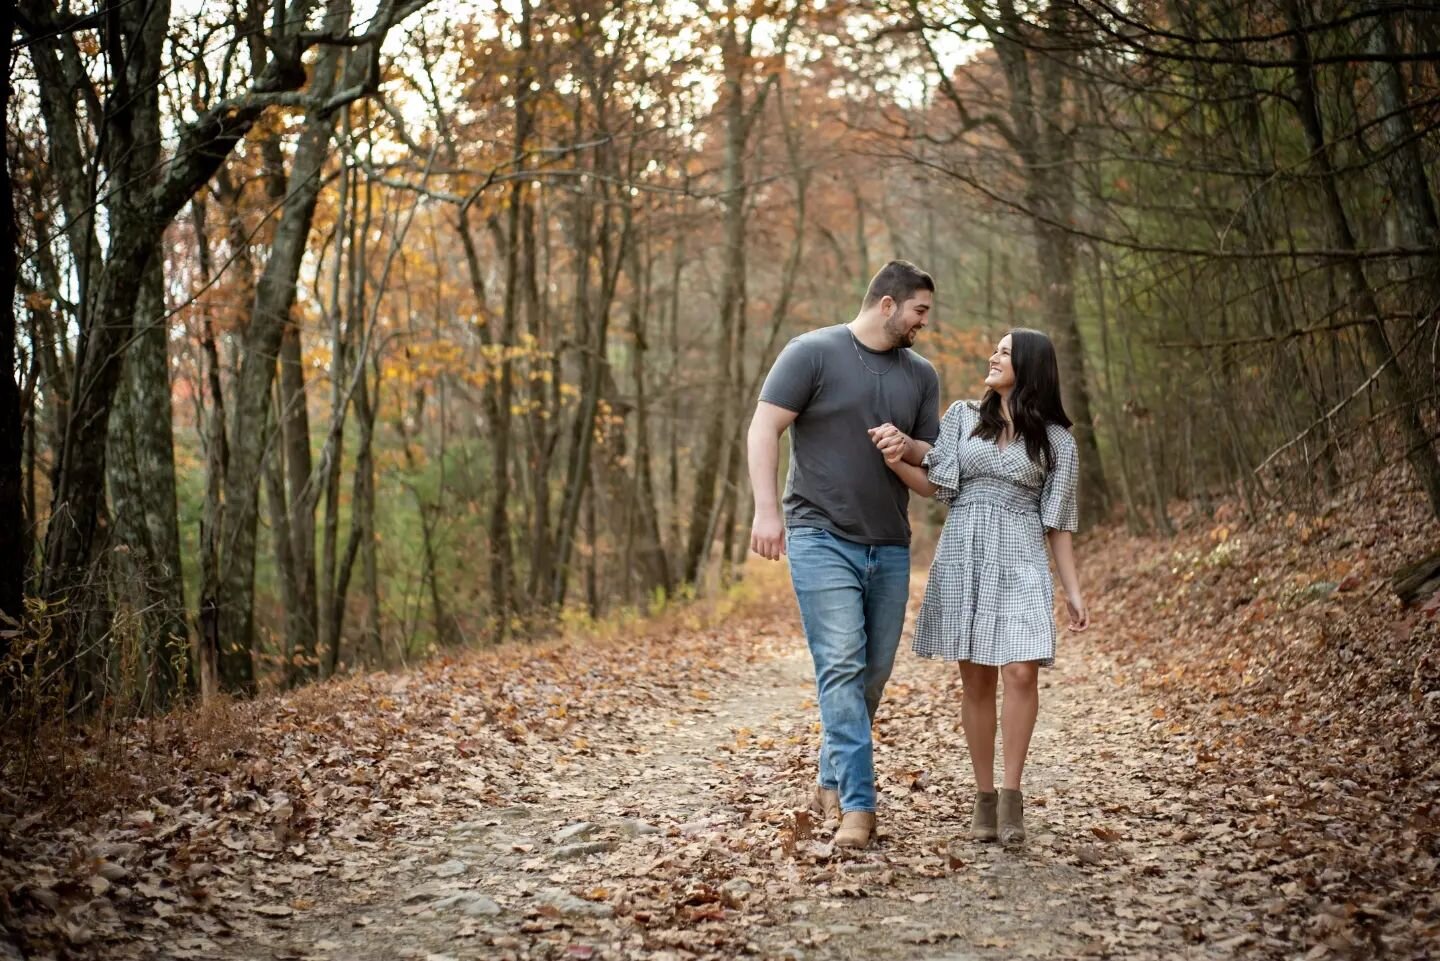 Happy Monday! Please enjoy a sneakpeak from this weekends couple session!